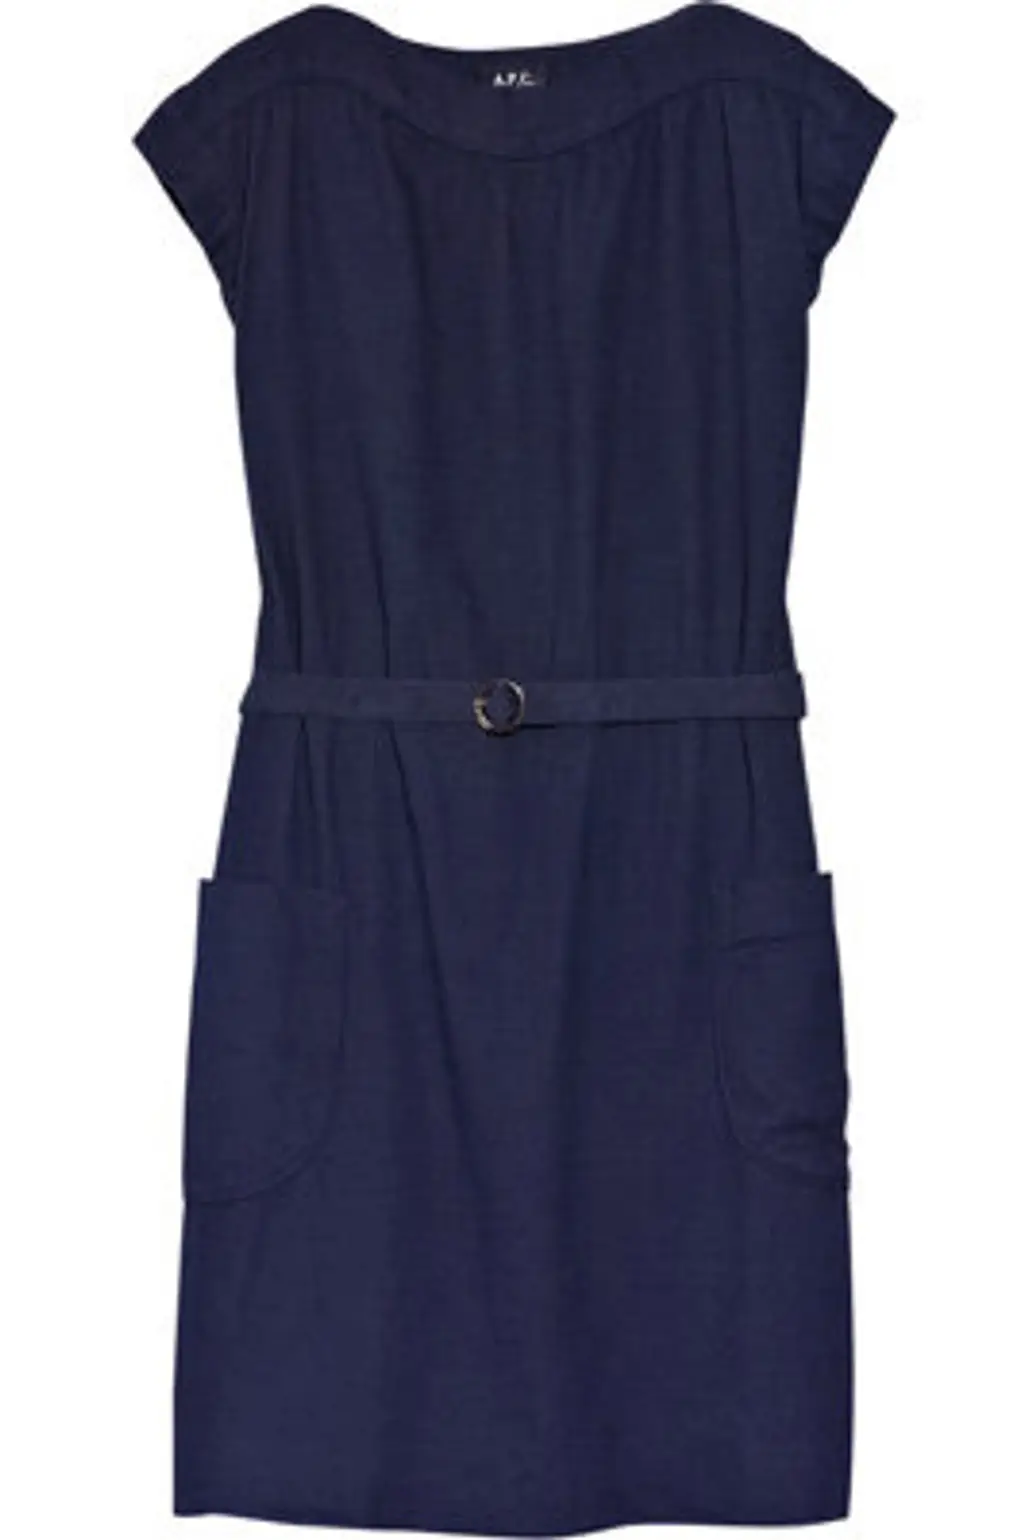 A.P.C. Belted Cotton Dress